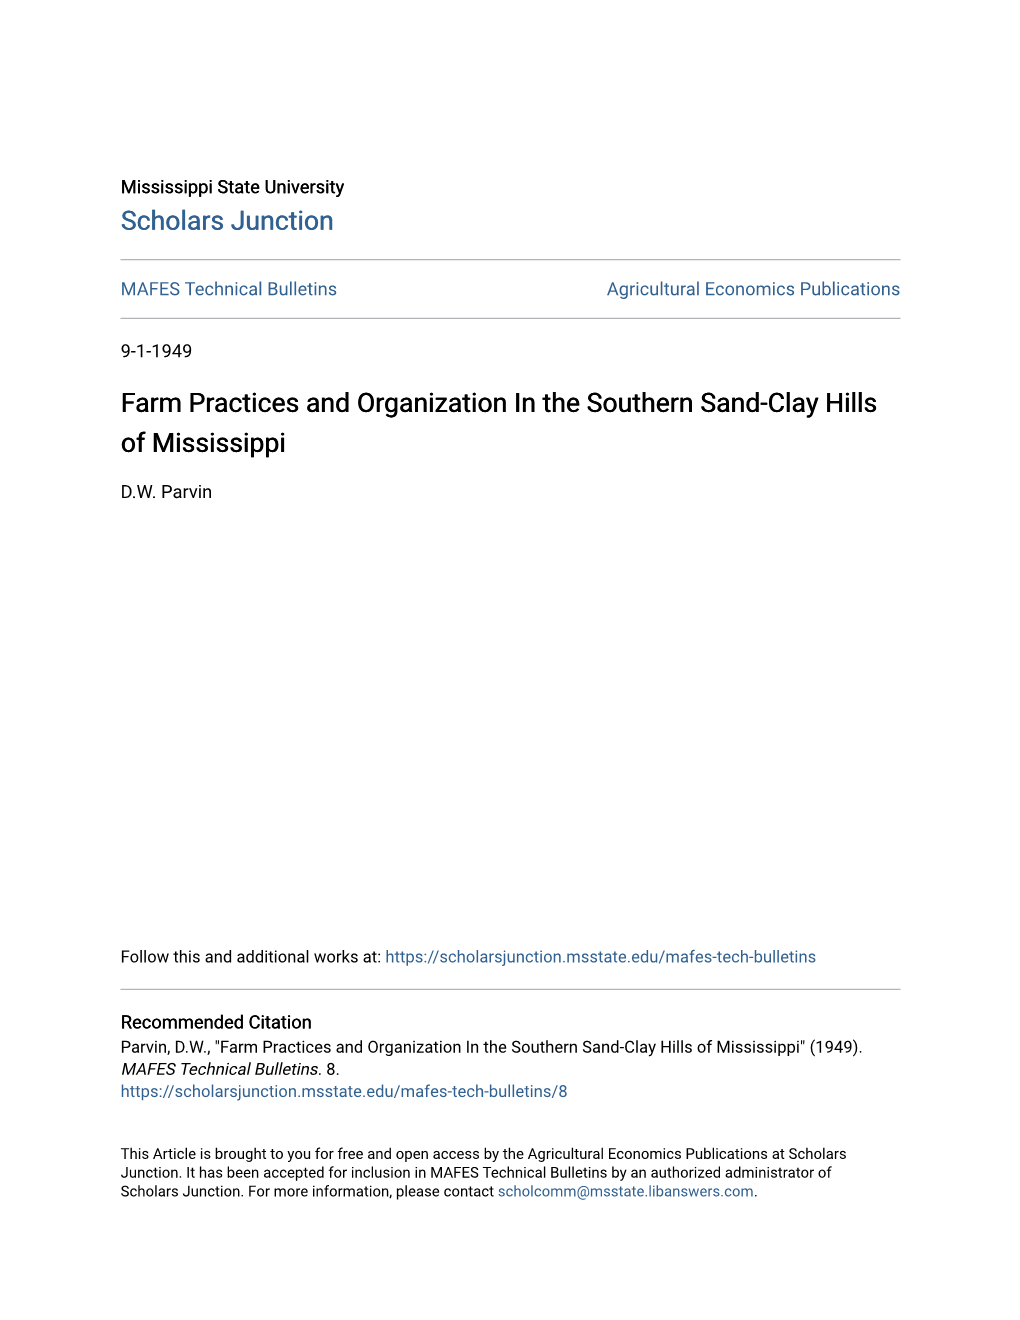 Farm Practices and Organization in the Southern Sand-Clay Hills of Mississippi